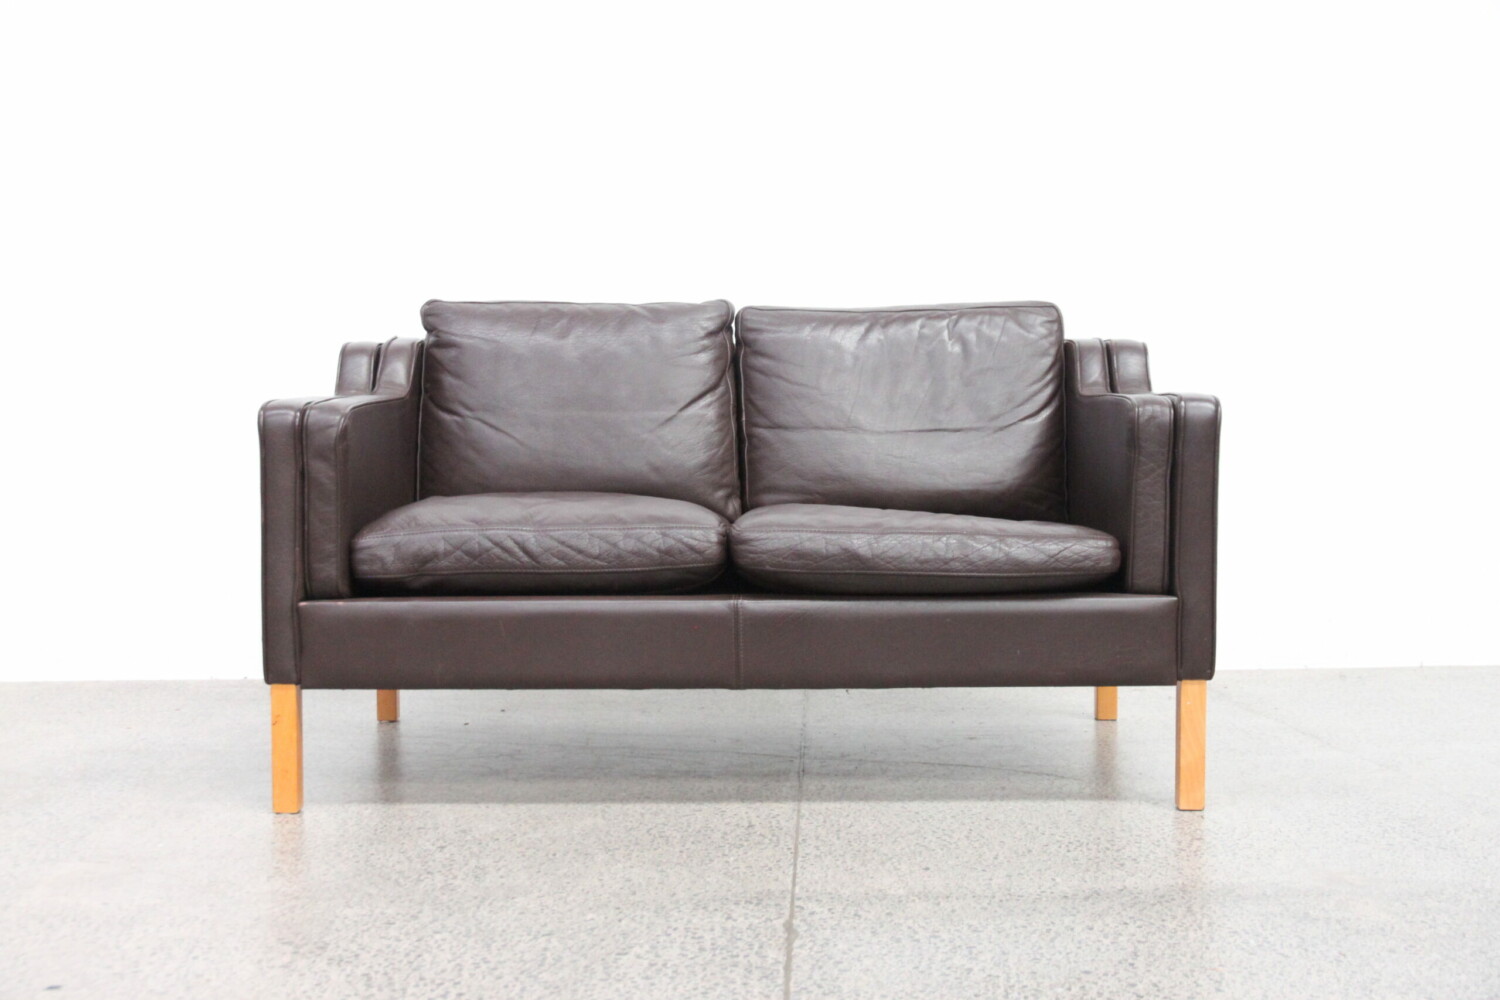 Pair of brown Leather Sofas by Stouby